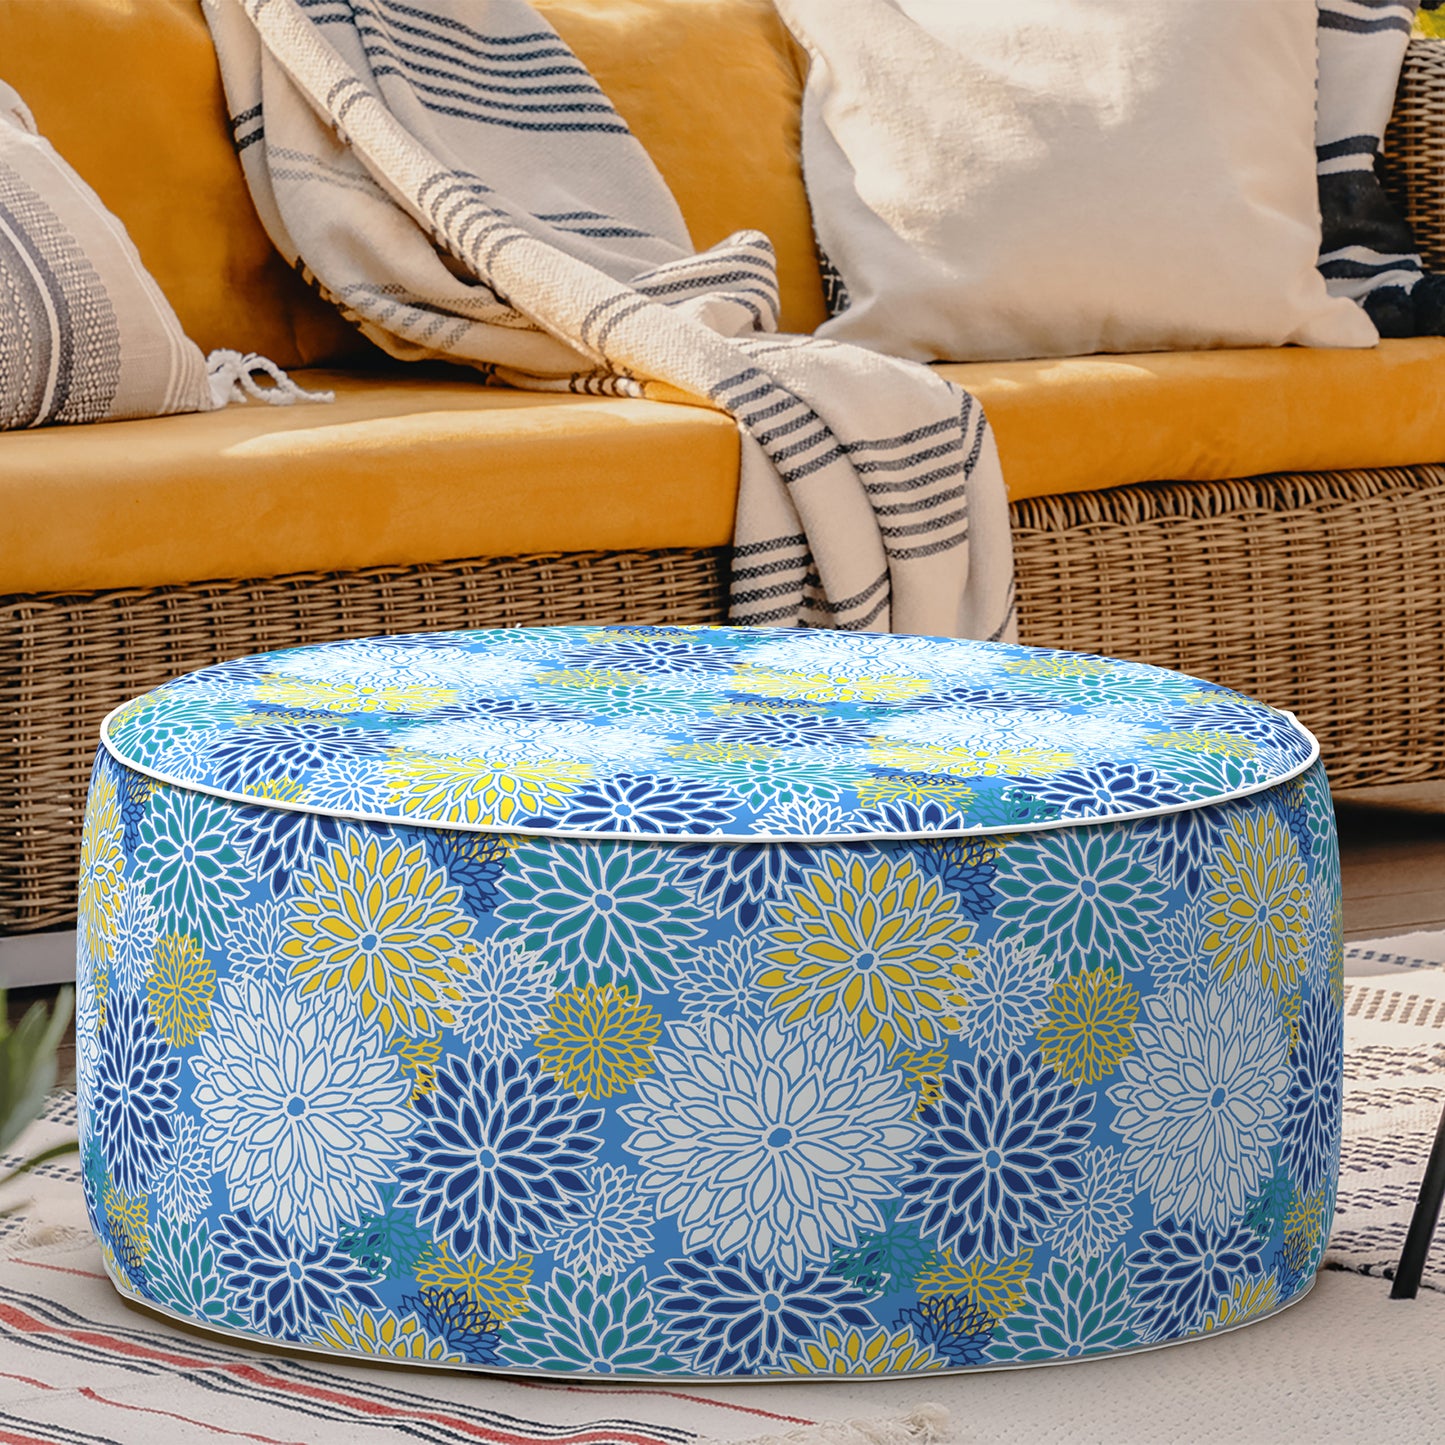 Outdoor Inflatable Stool Ottoman, All Weather Portable Footrest Stool, Furniture Stool Ottomans for Home Garden Beach, D31”xH14”, Dahlia Blue